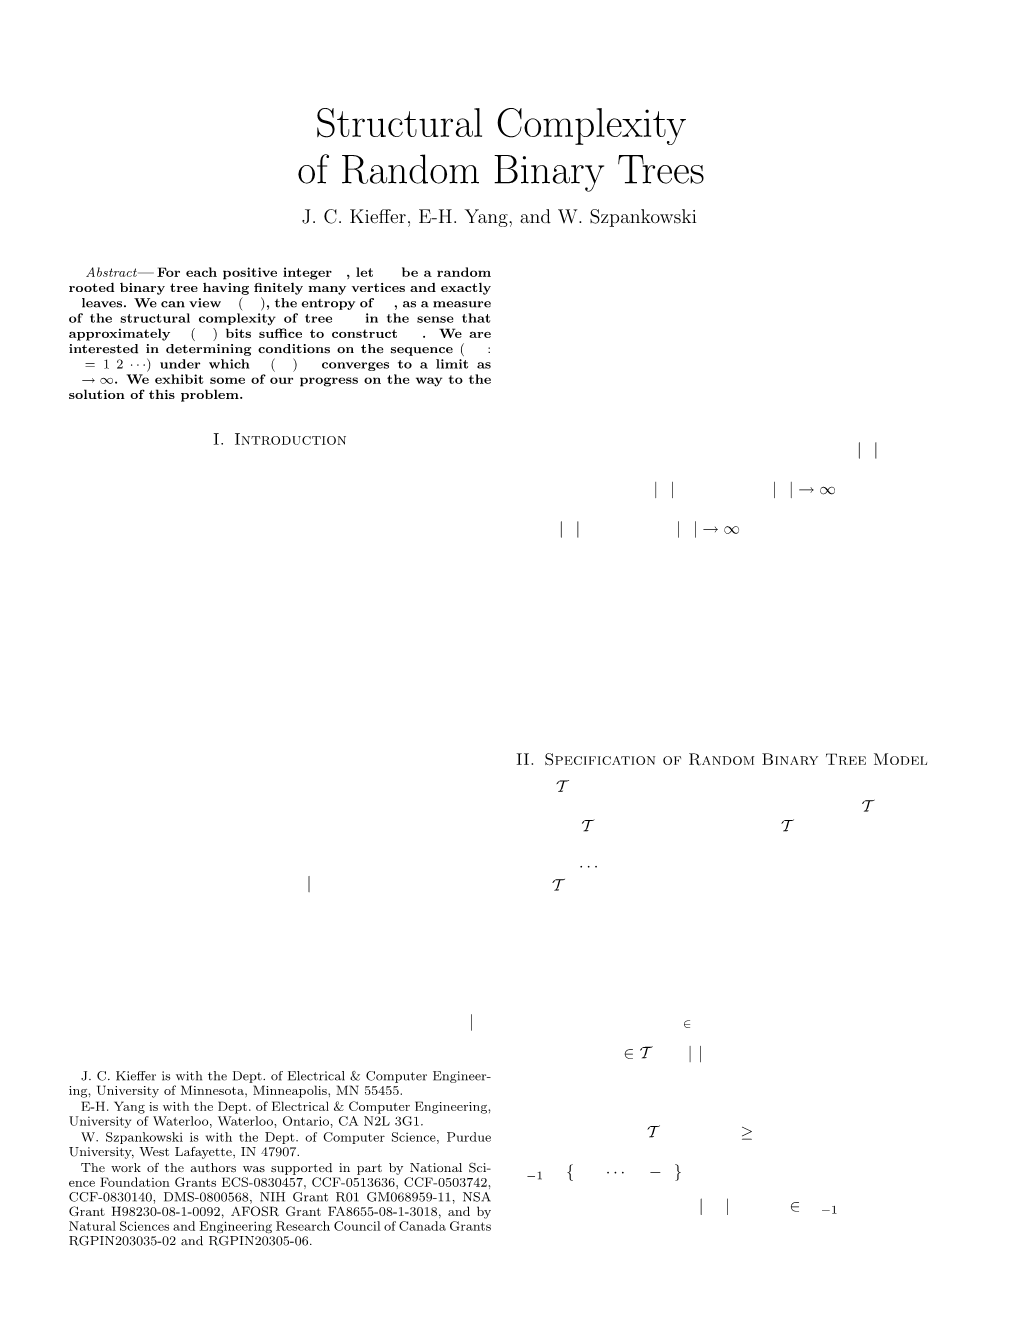 Structural Complexity of Random Binary Trees J